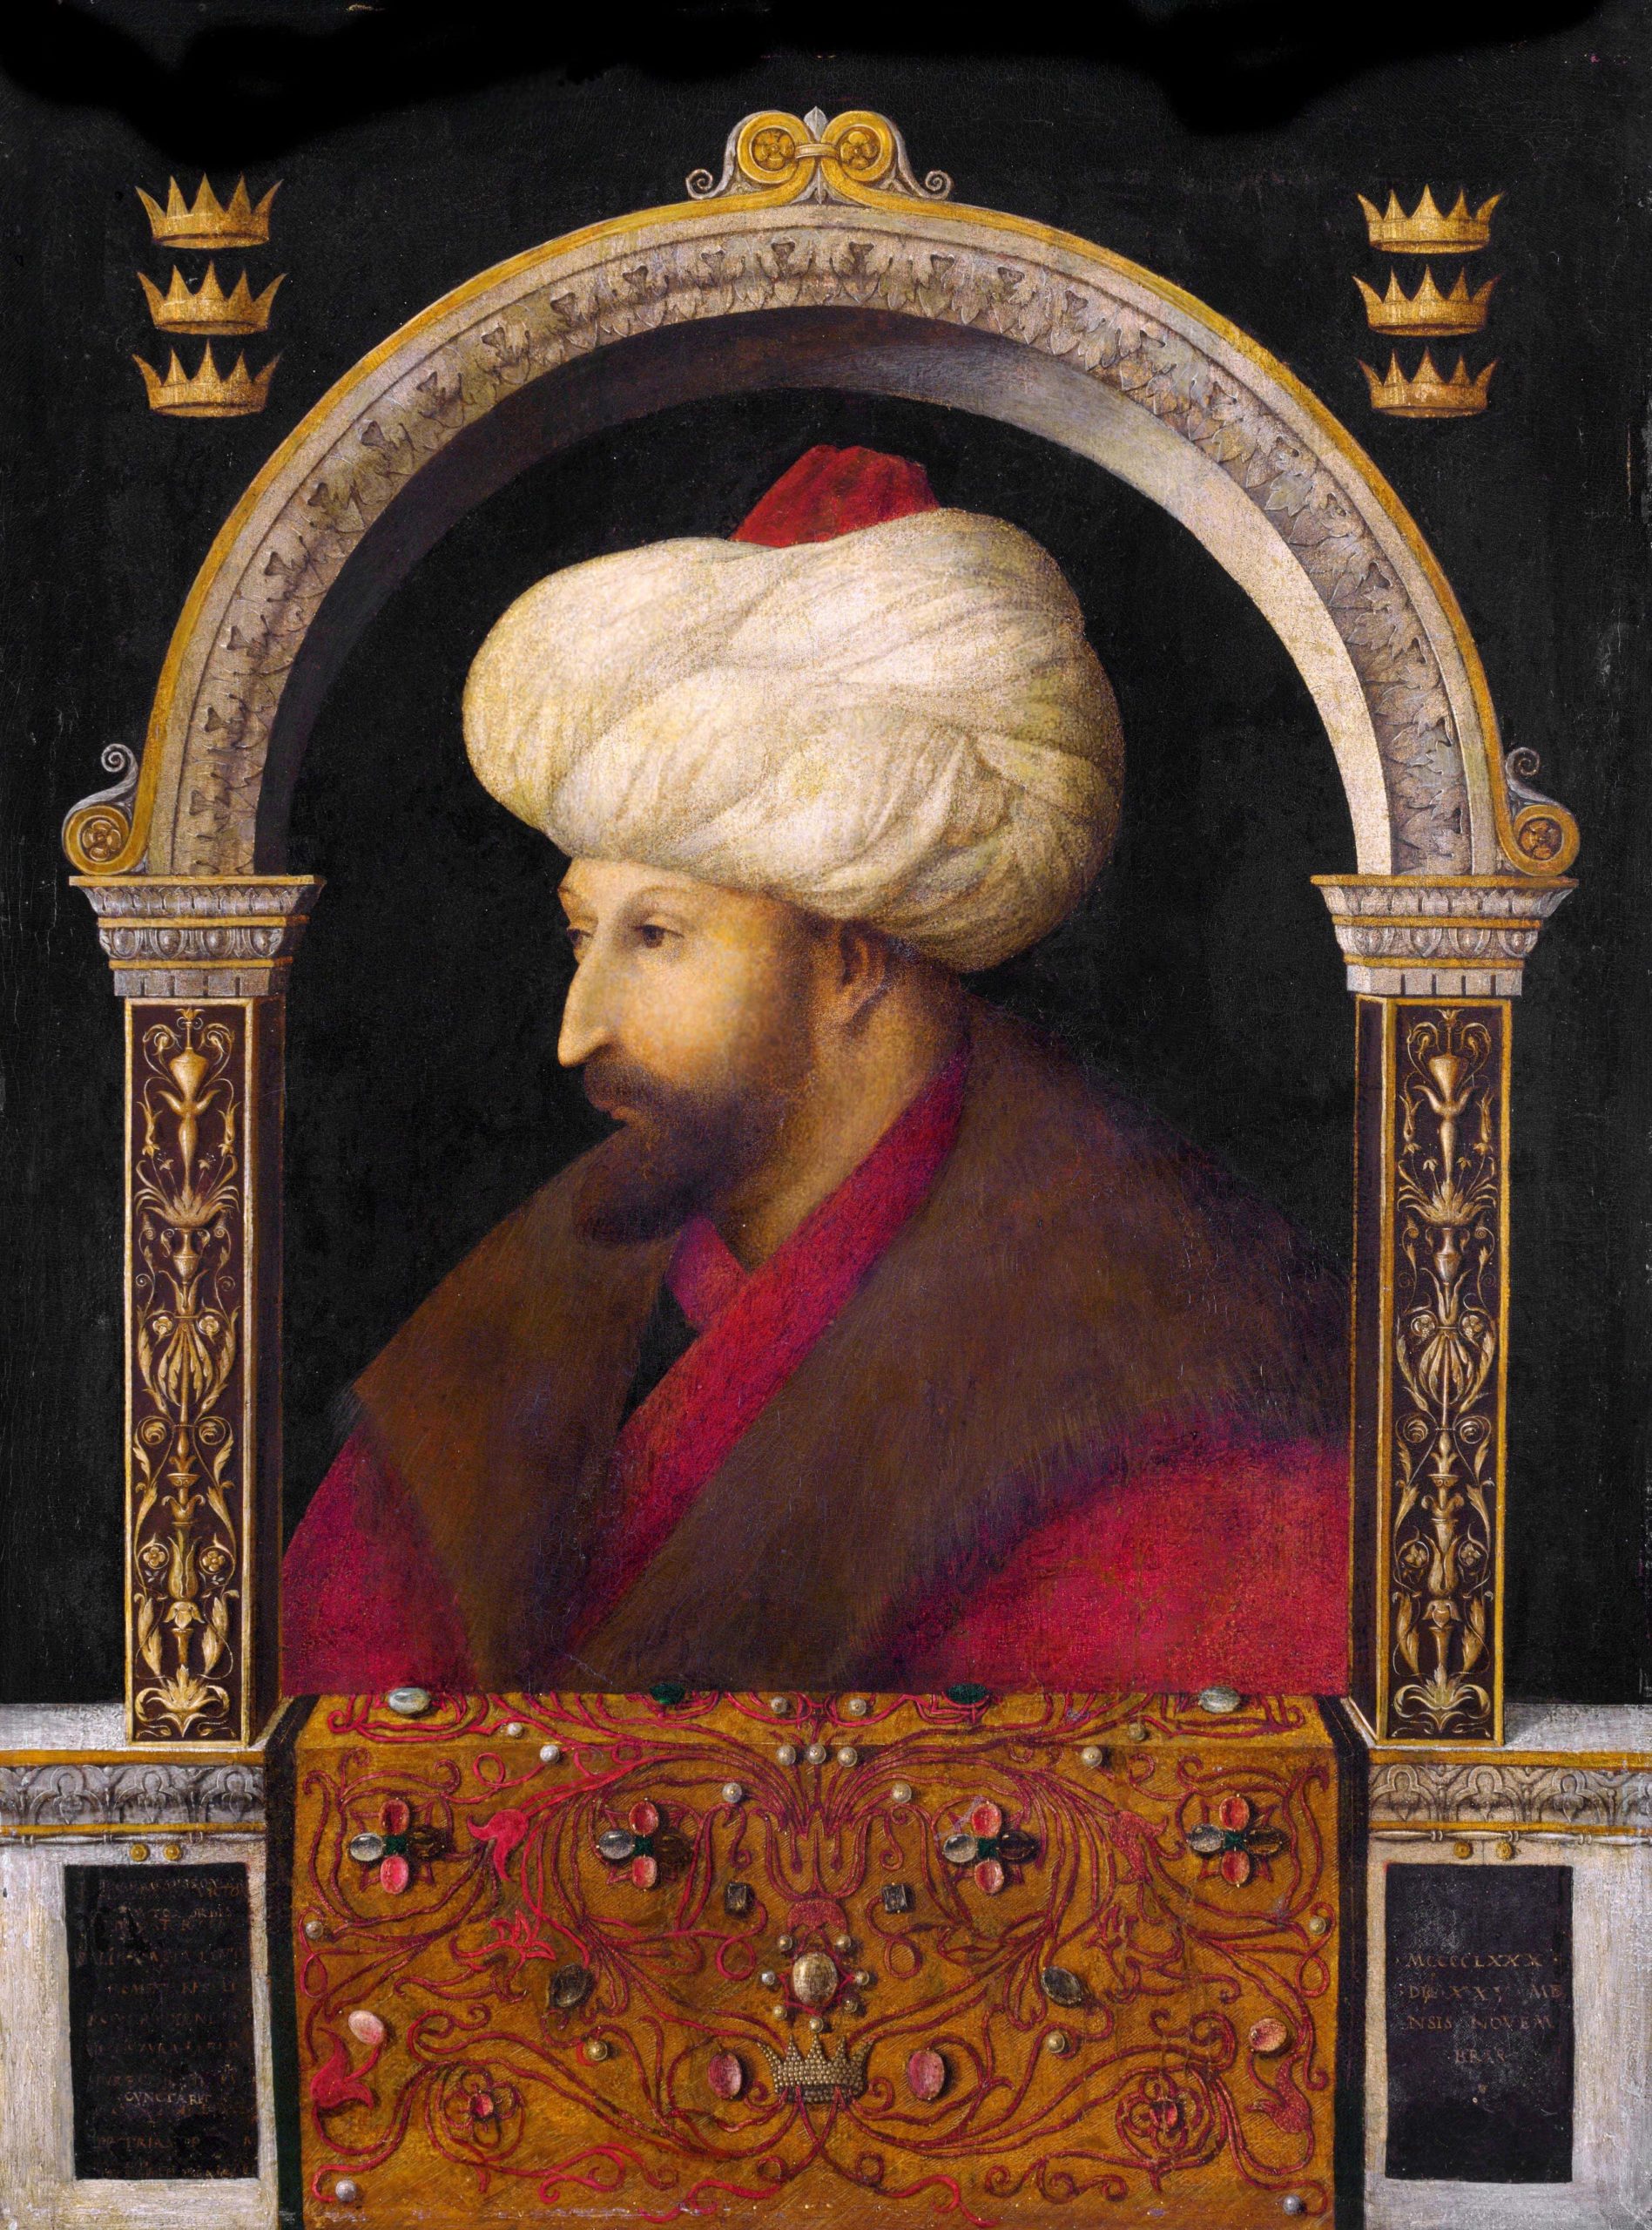 Gentile Bellini, Portrait of Sultan Mehmet II, 1480, oil on canvas, 69.9 x 52.1 cm, The National Gallery London. Layard Bequest, 1916. Currently on loan to the Victoria and Albert Museum, London.